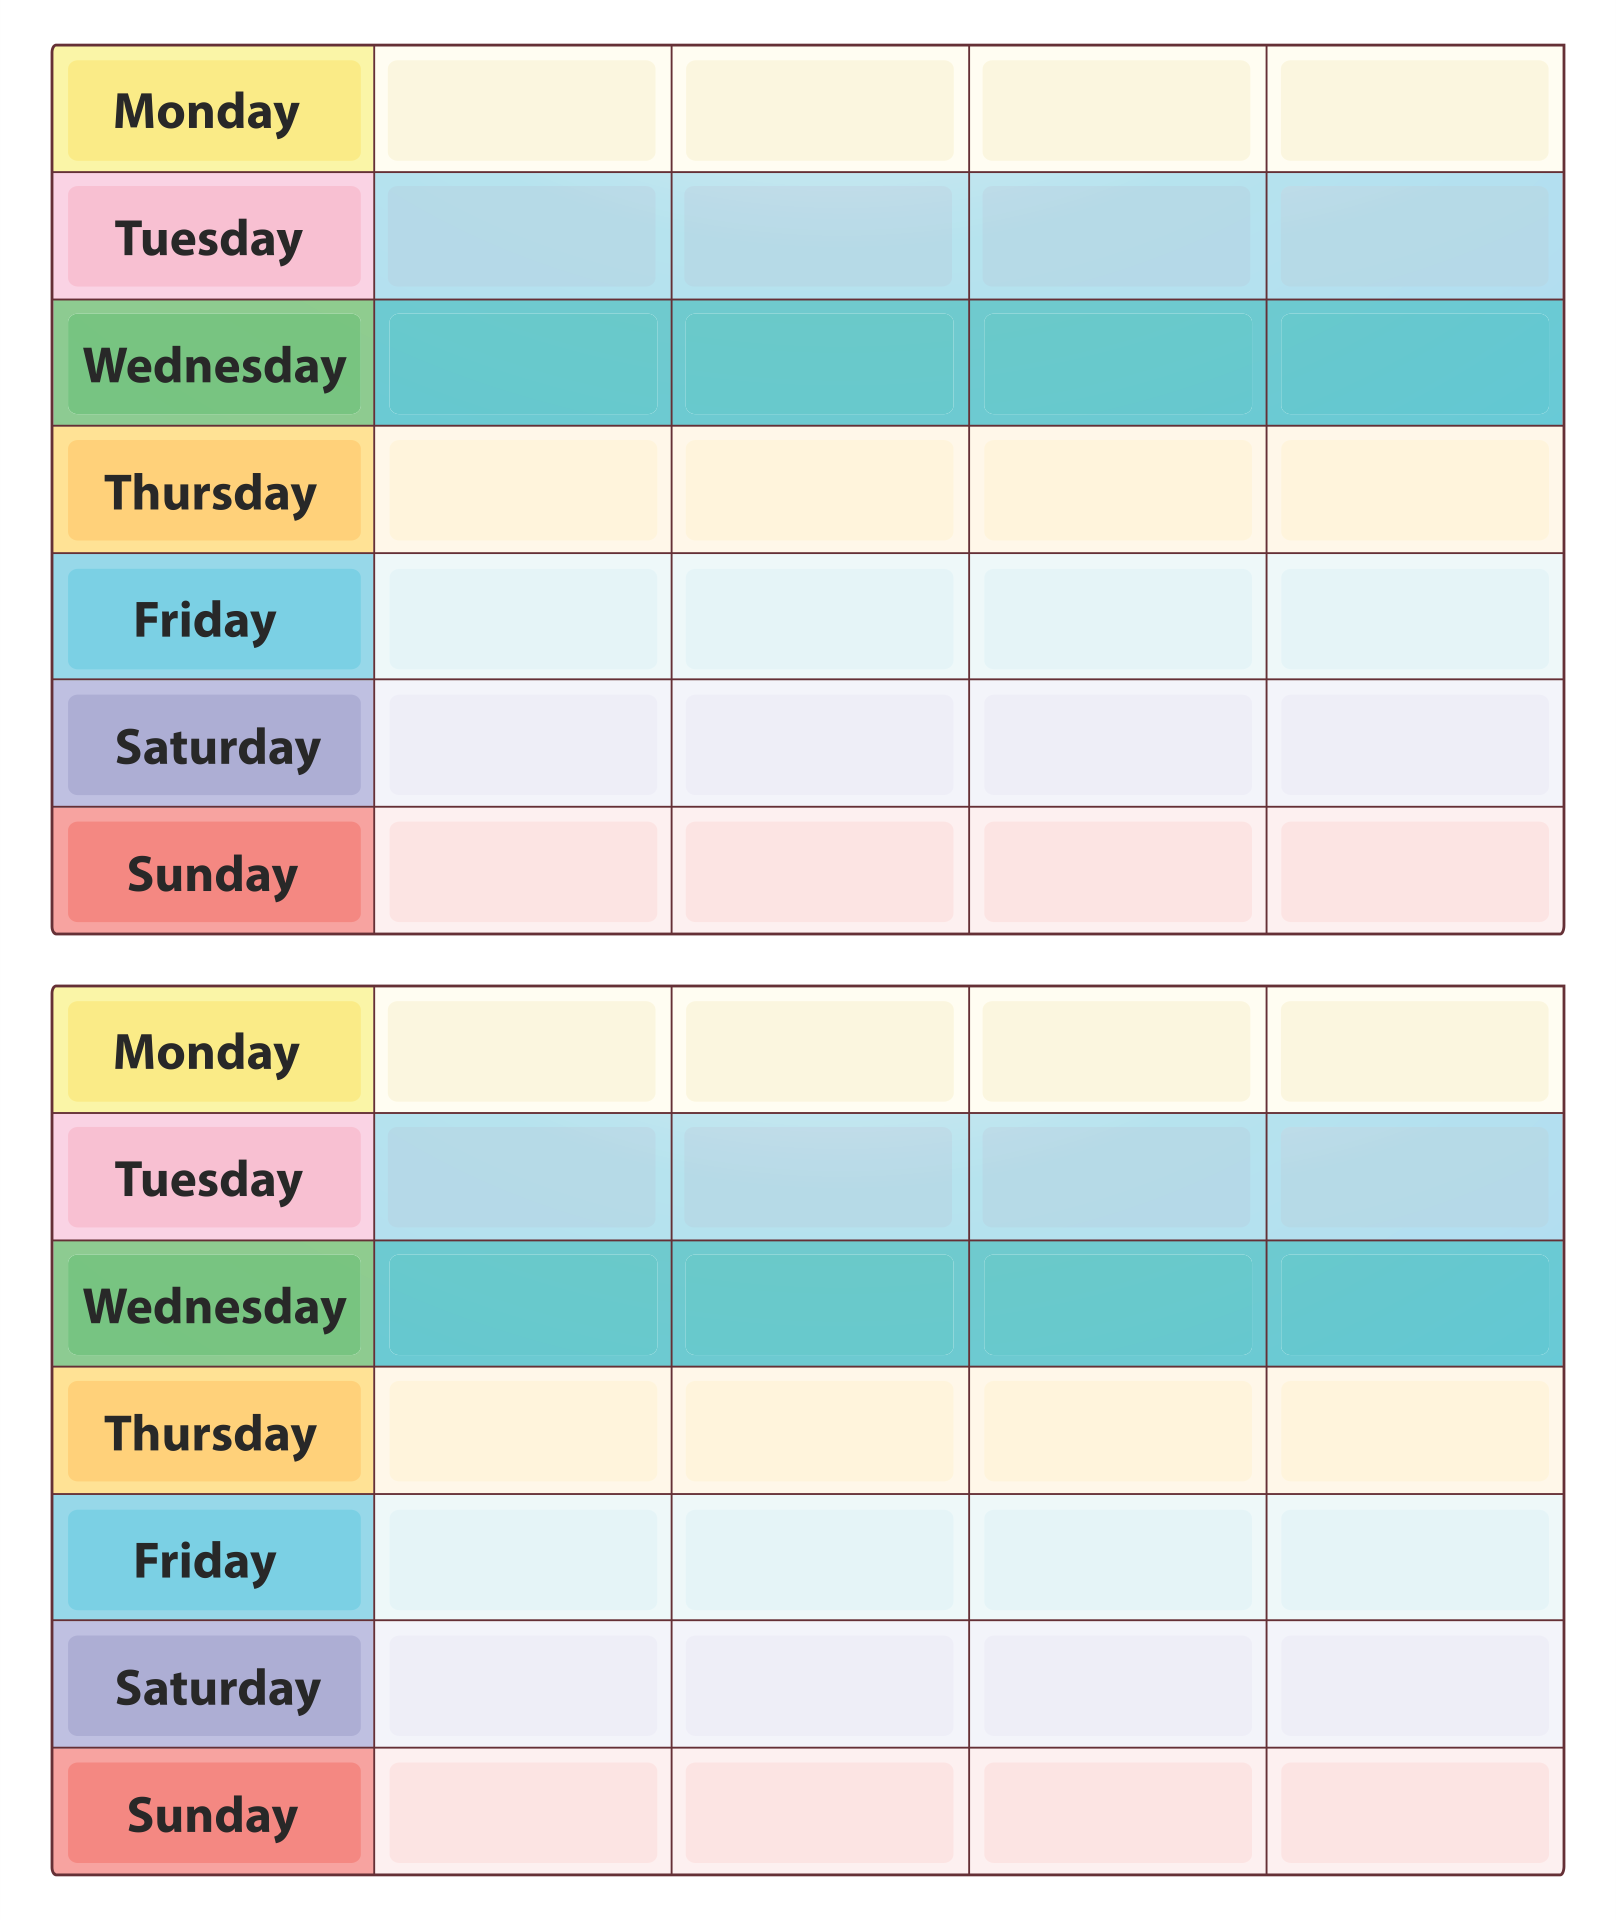 timesheet-excel-templates-1-week-2-weeks-and-monthly-versions